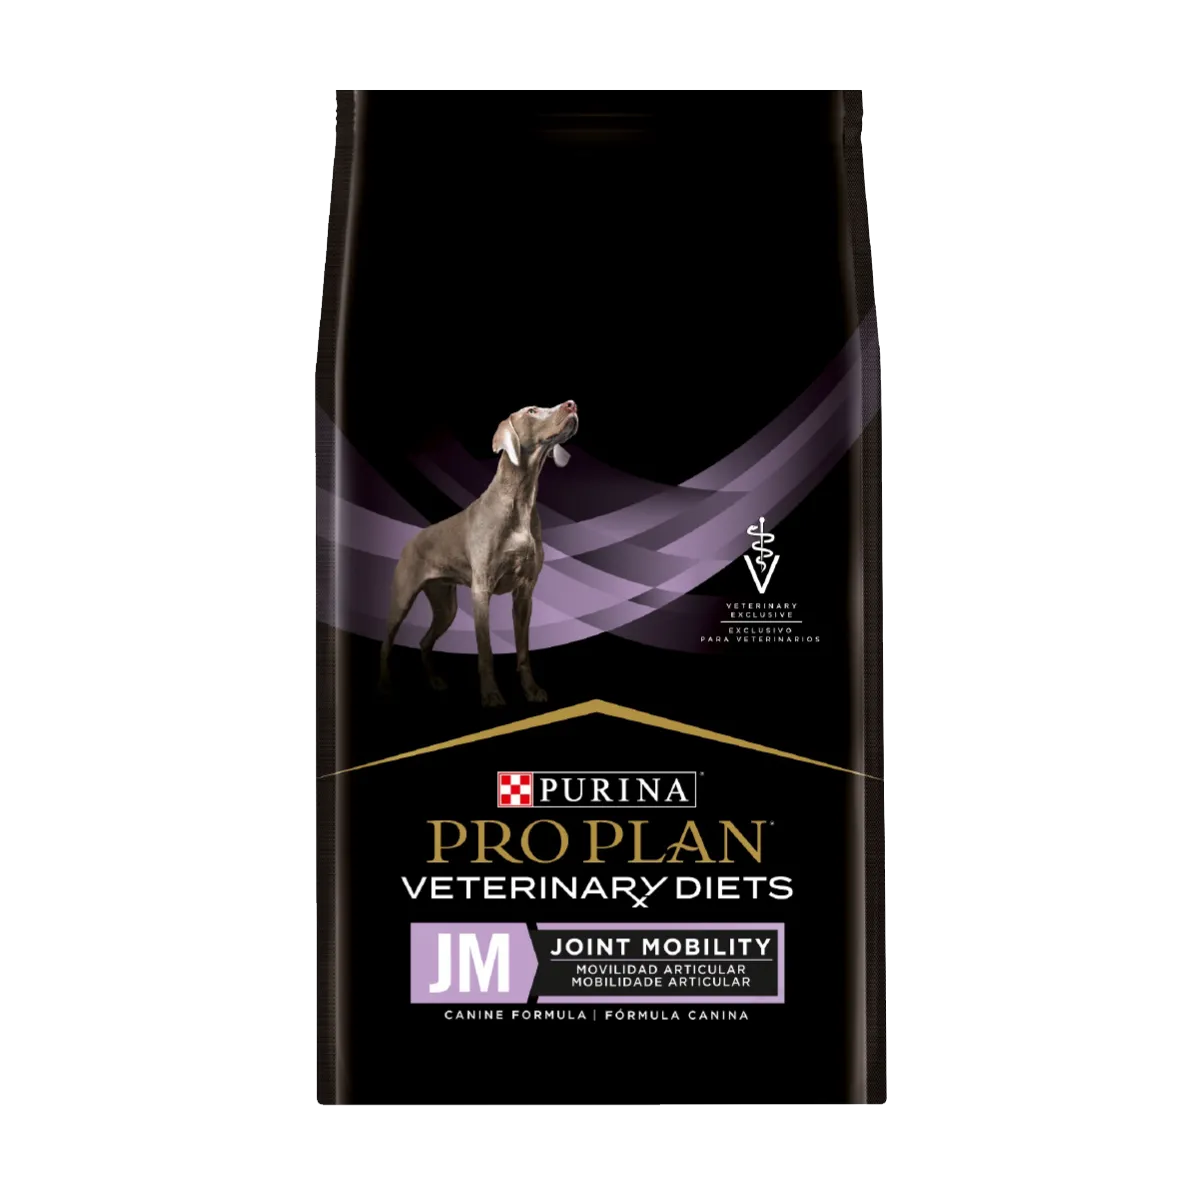 purina-pro-plan-veterinay-diets-dog-jm-joint-mobility